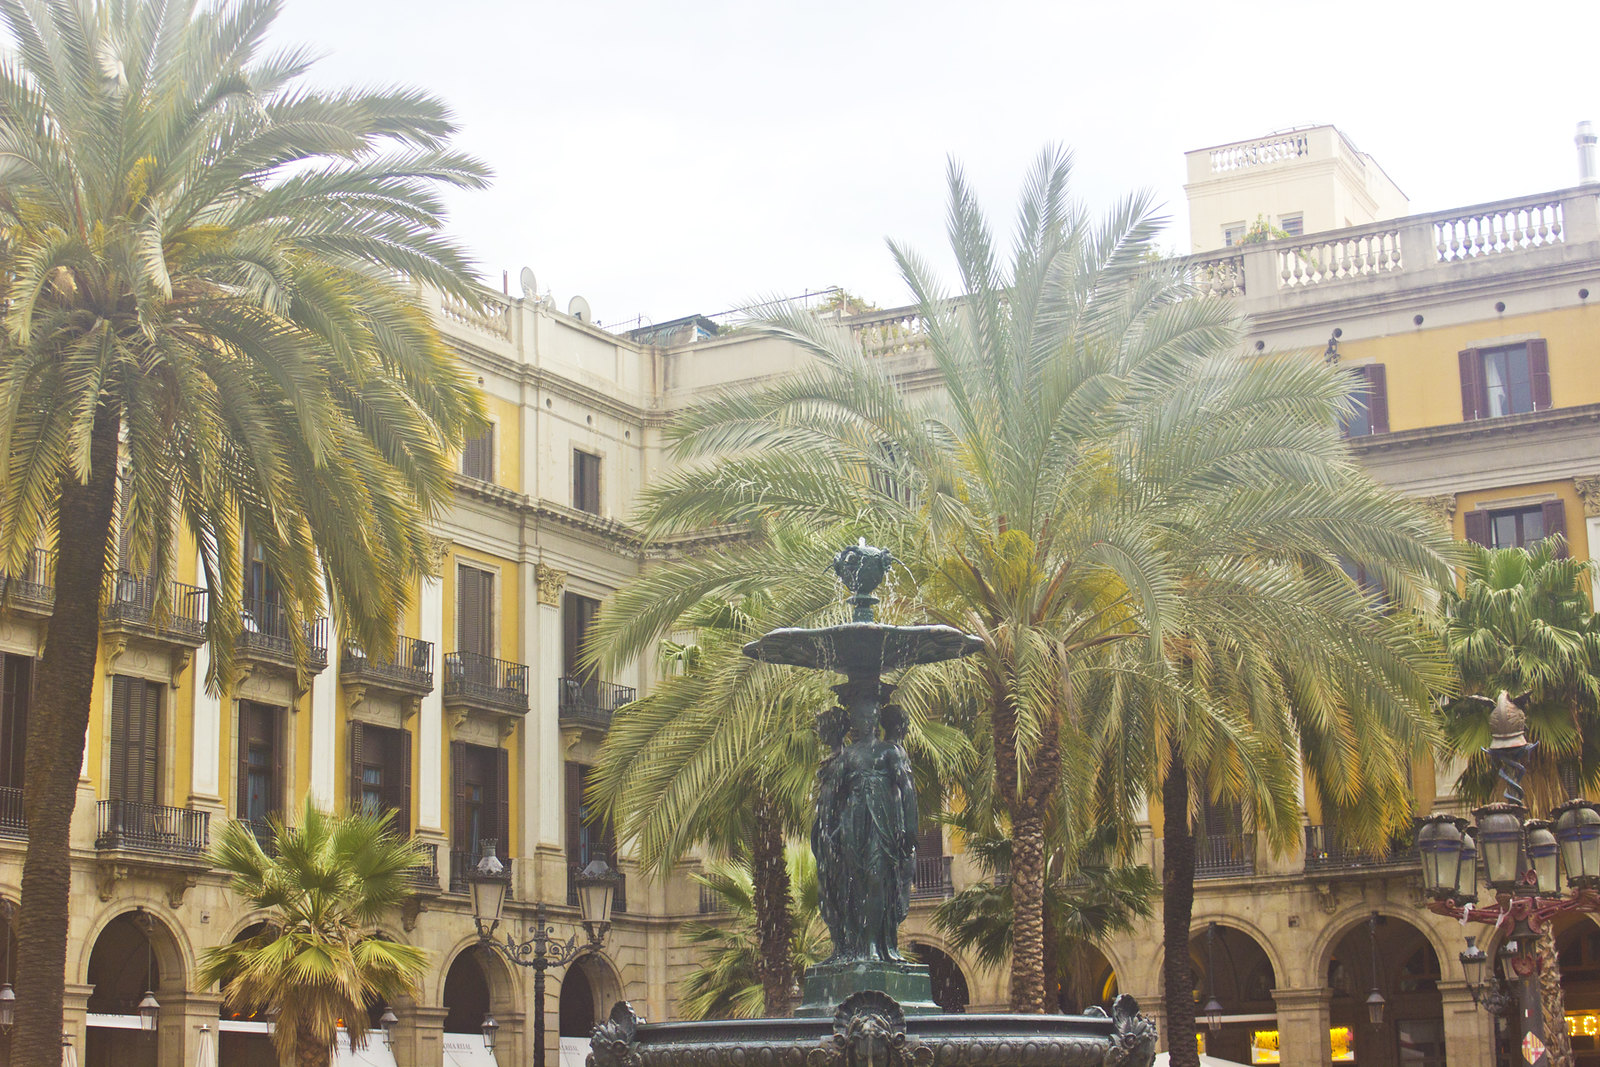 Barcelona pretty architecture exterior building gold peach white blue tiling tiles palm trees fountain